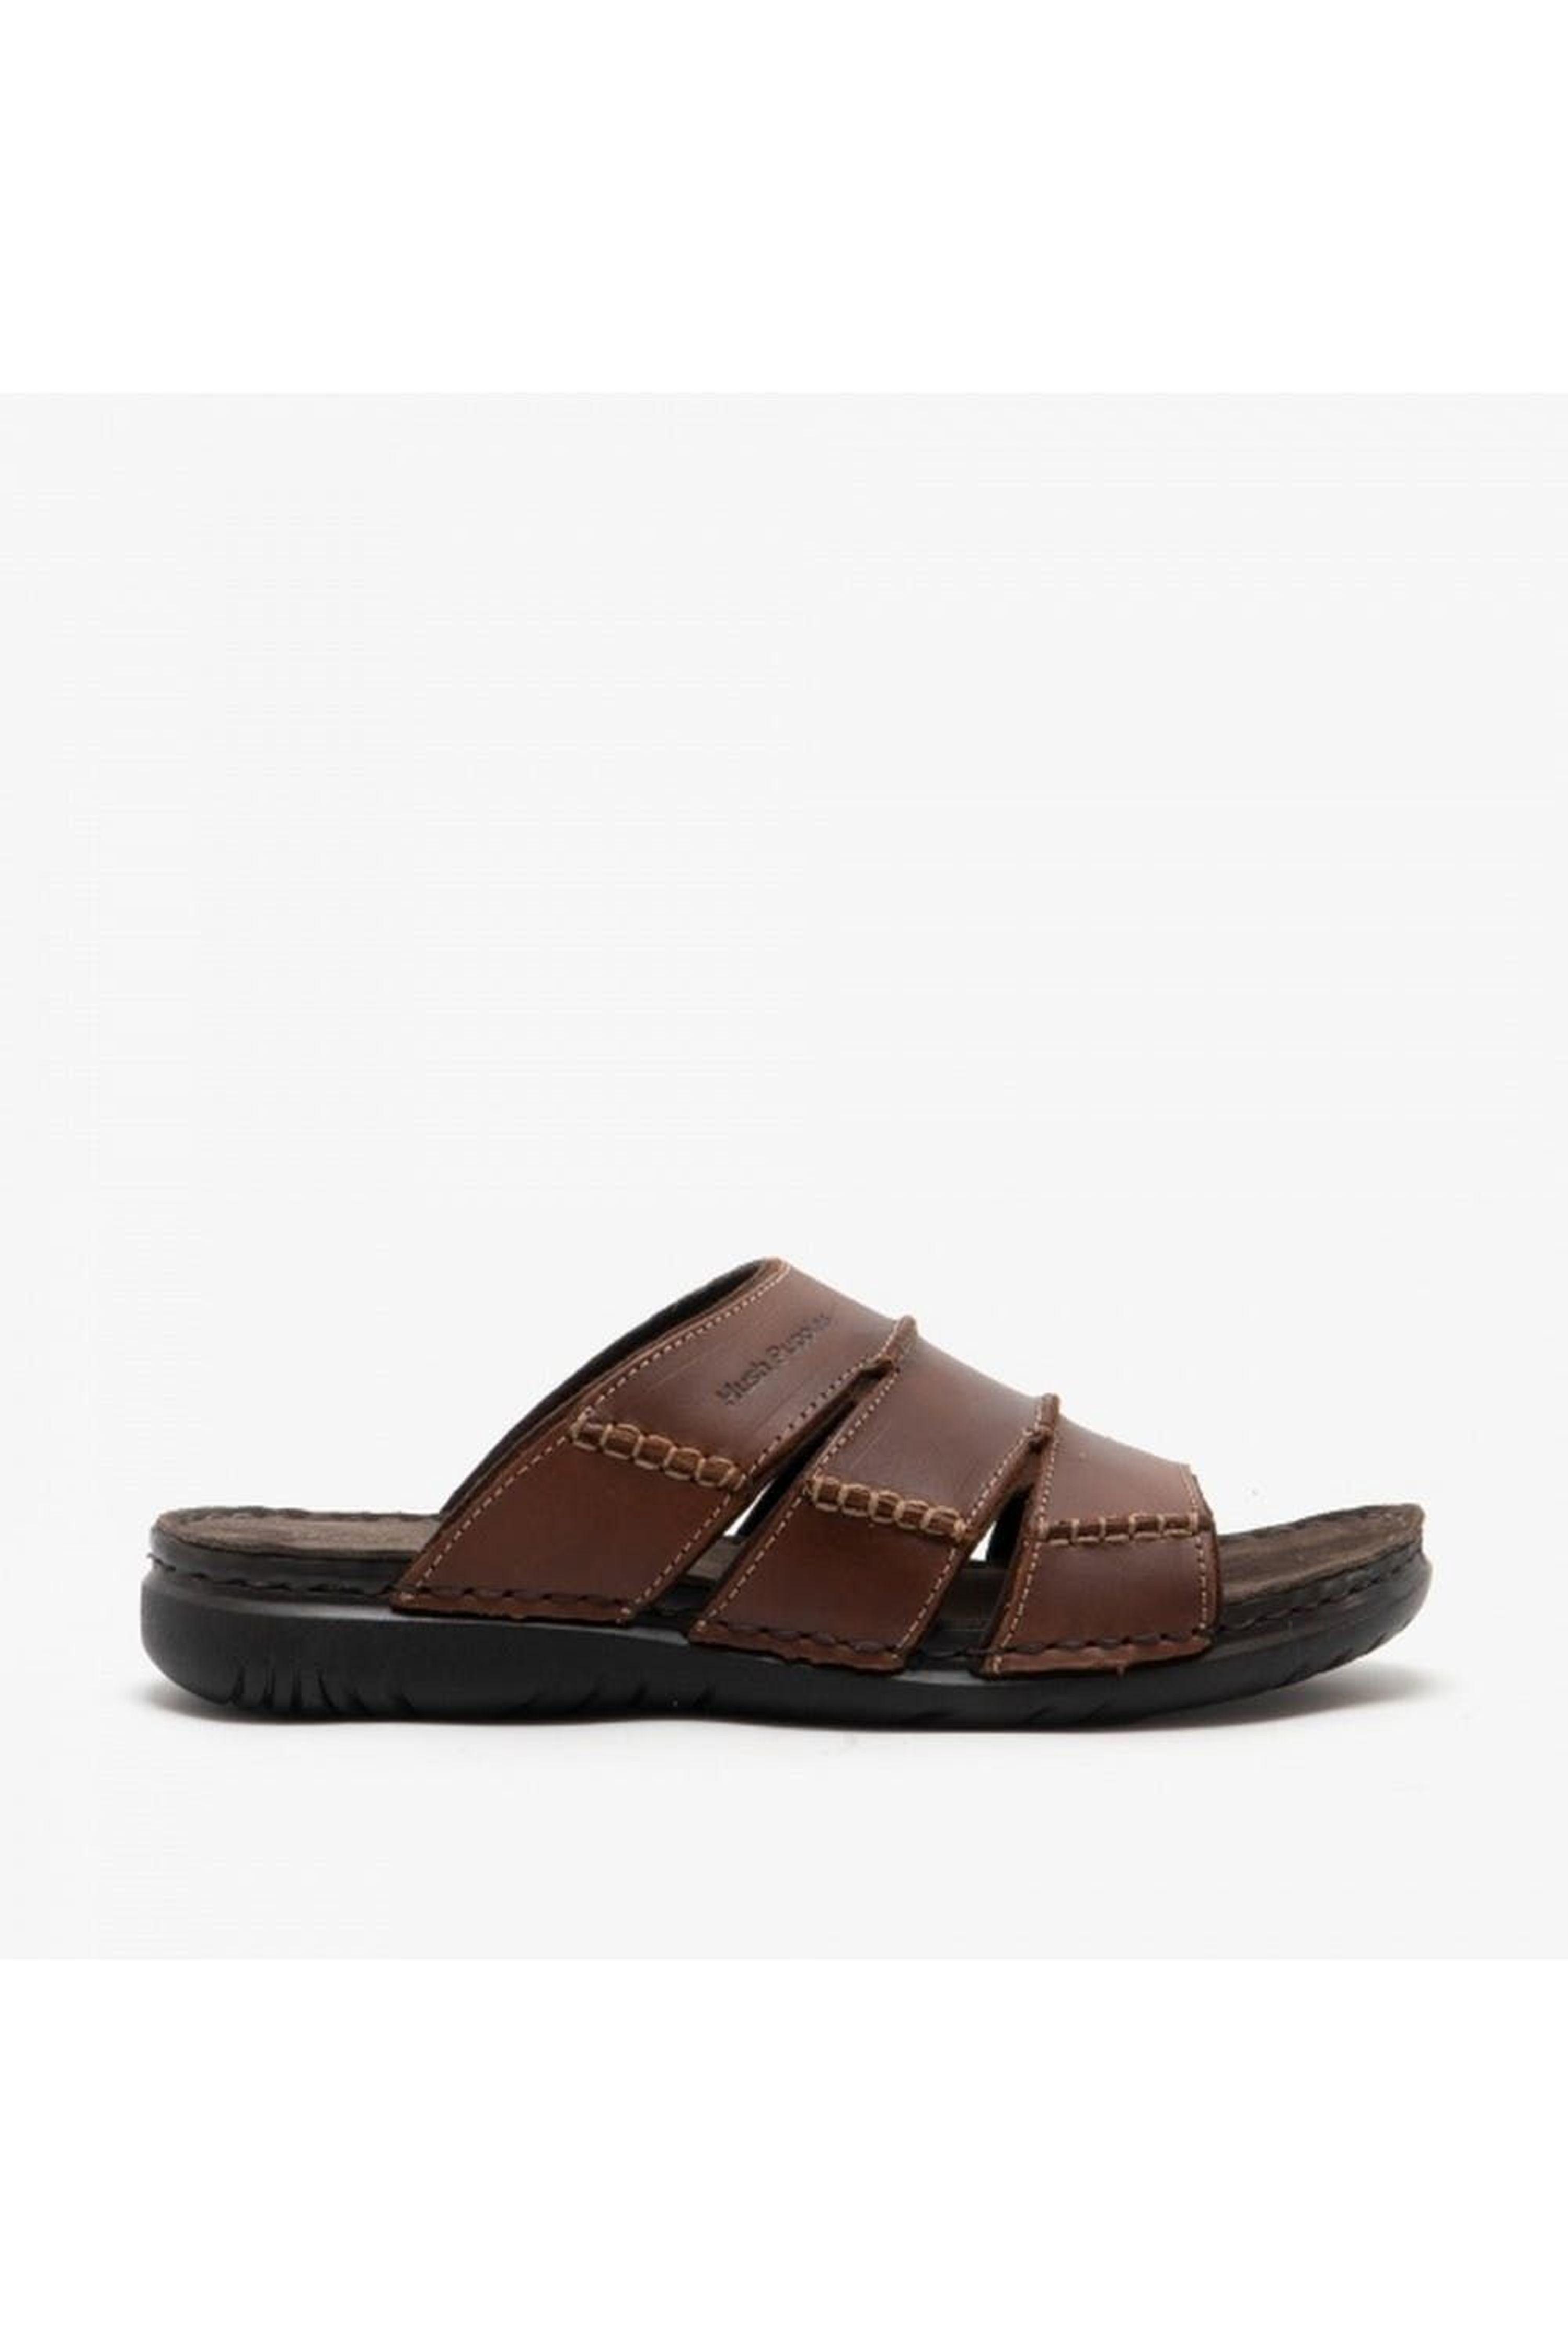 Men's Bellerin Morocco Leather Sandals by Hush Puppies | eBay